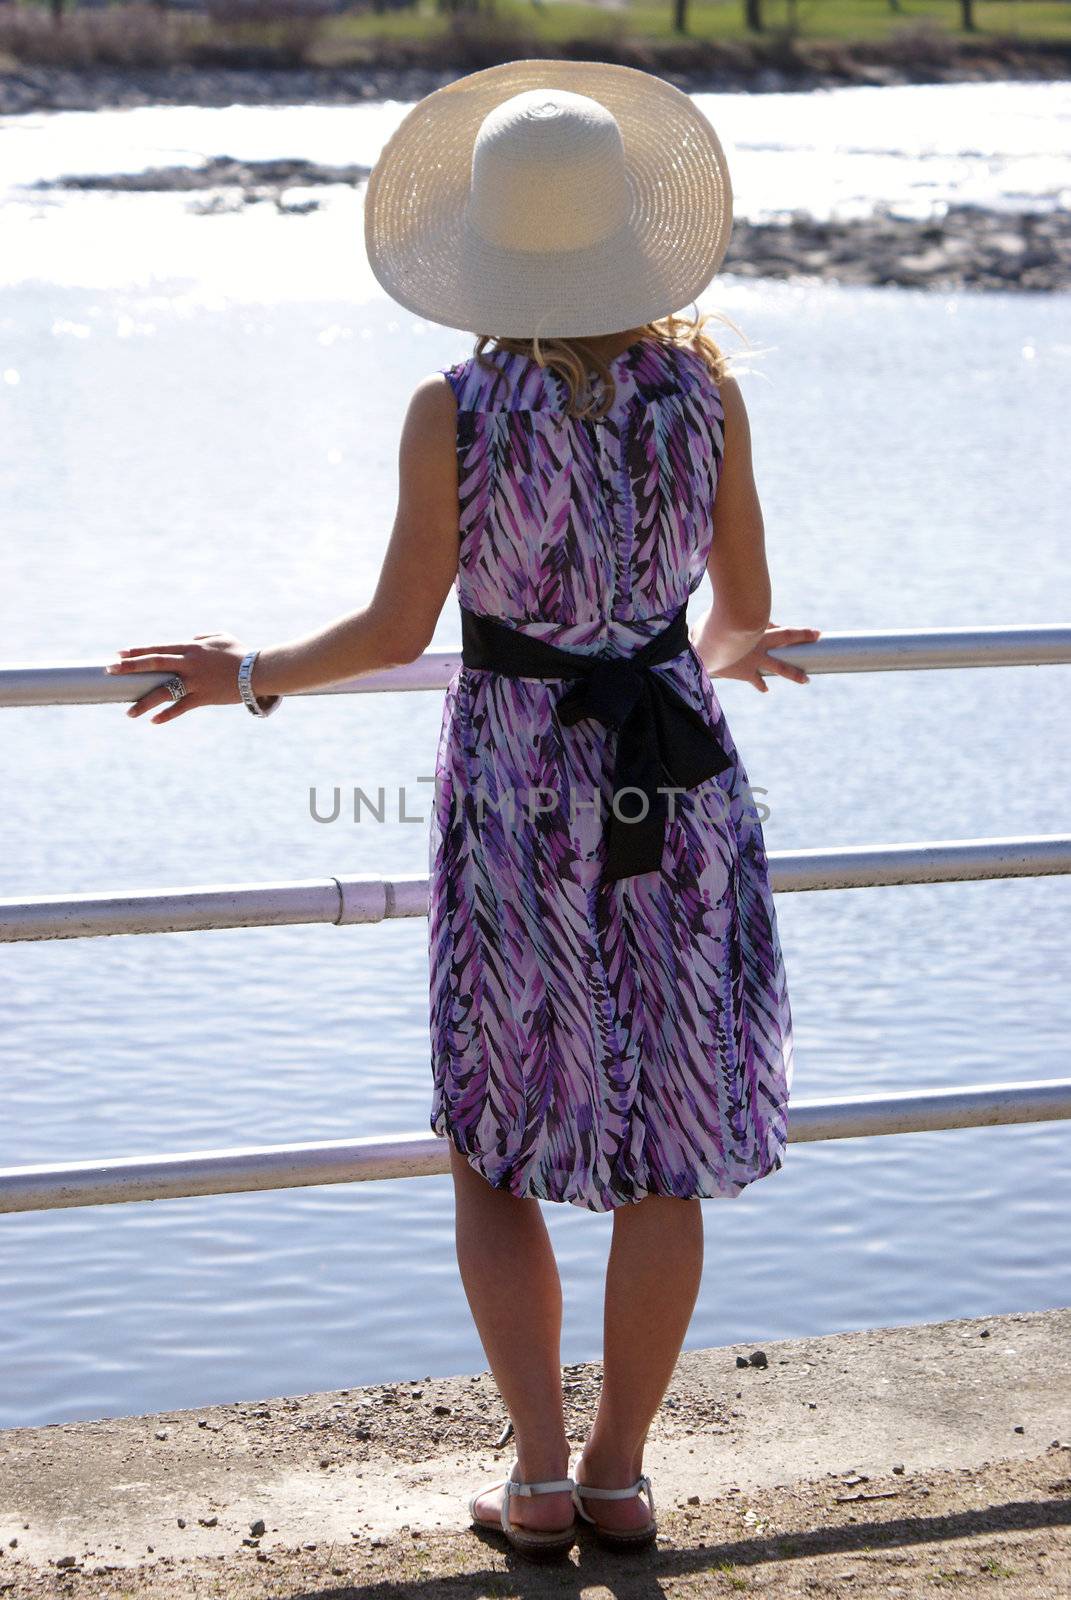 A young woman stands at the railing by the riverside on this sunny day.